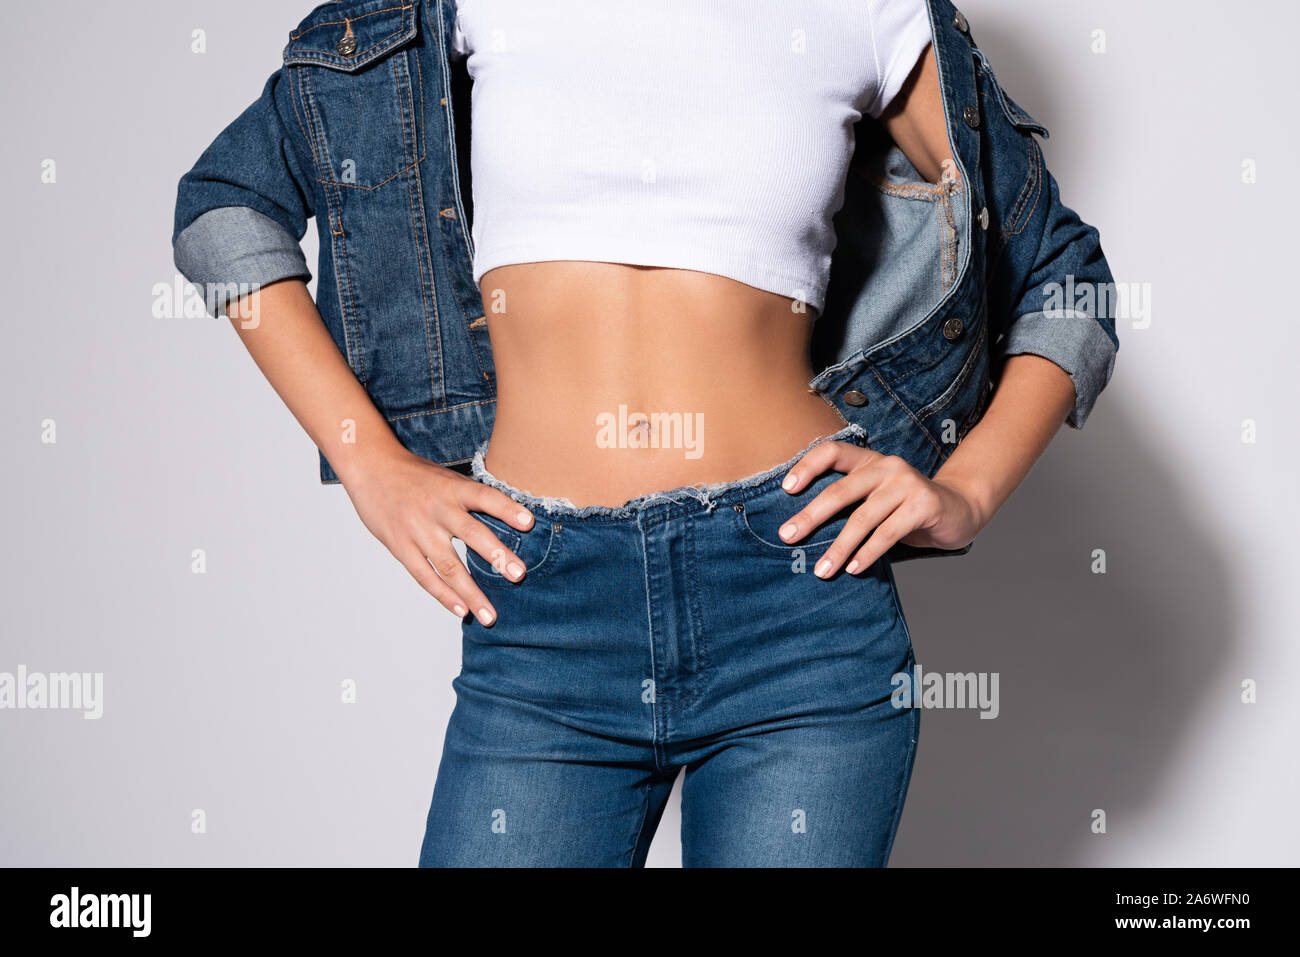 cropped view of woman in jeans standing with hands on hips on white Stock Photo